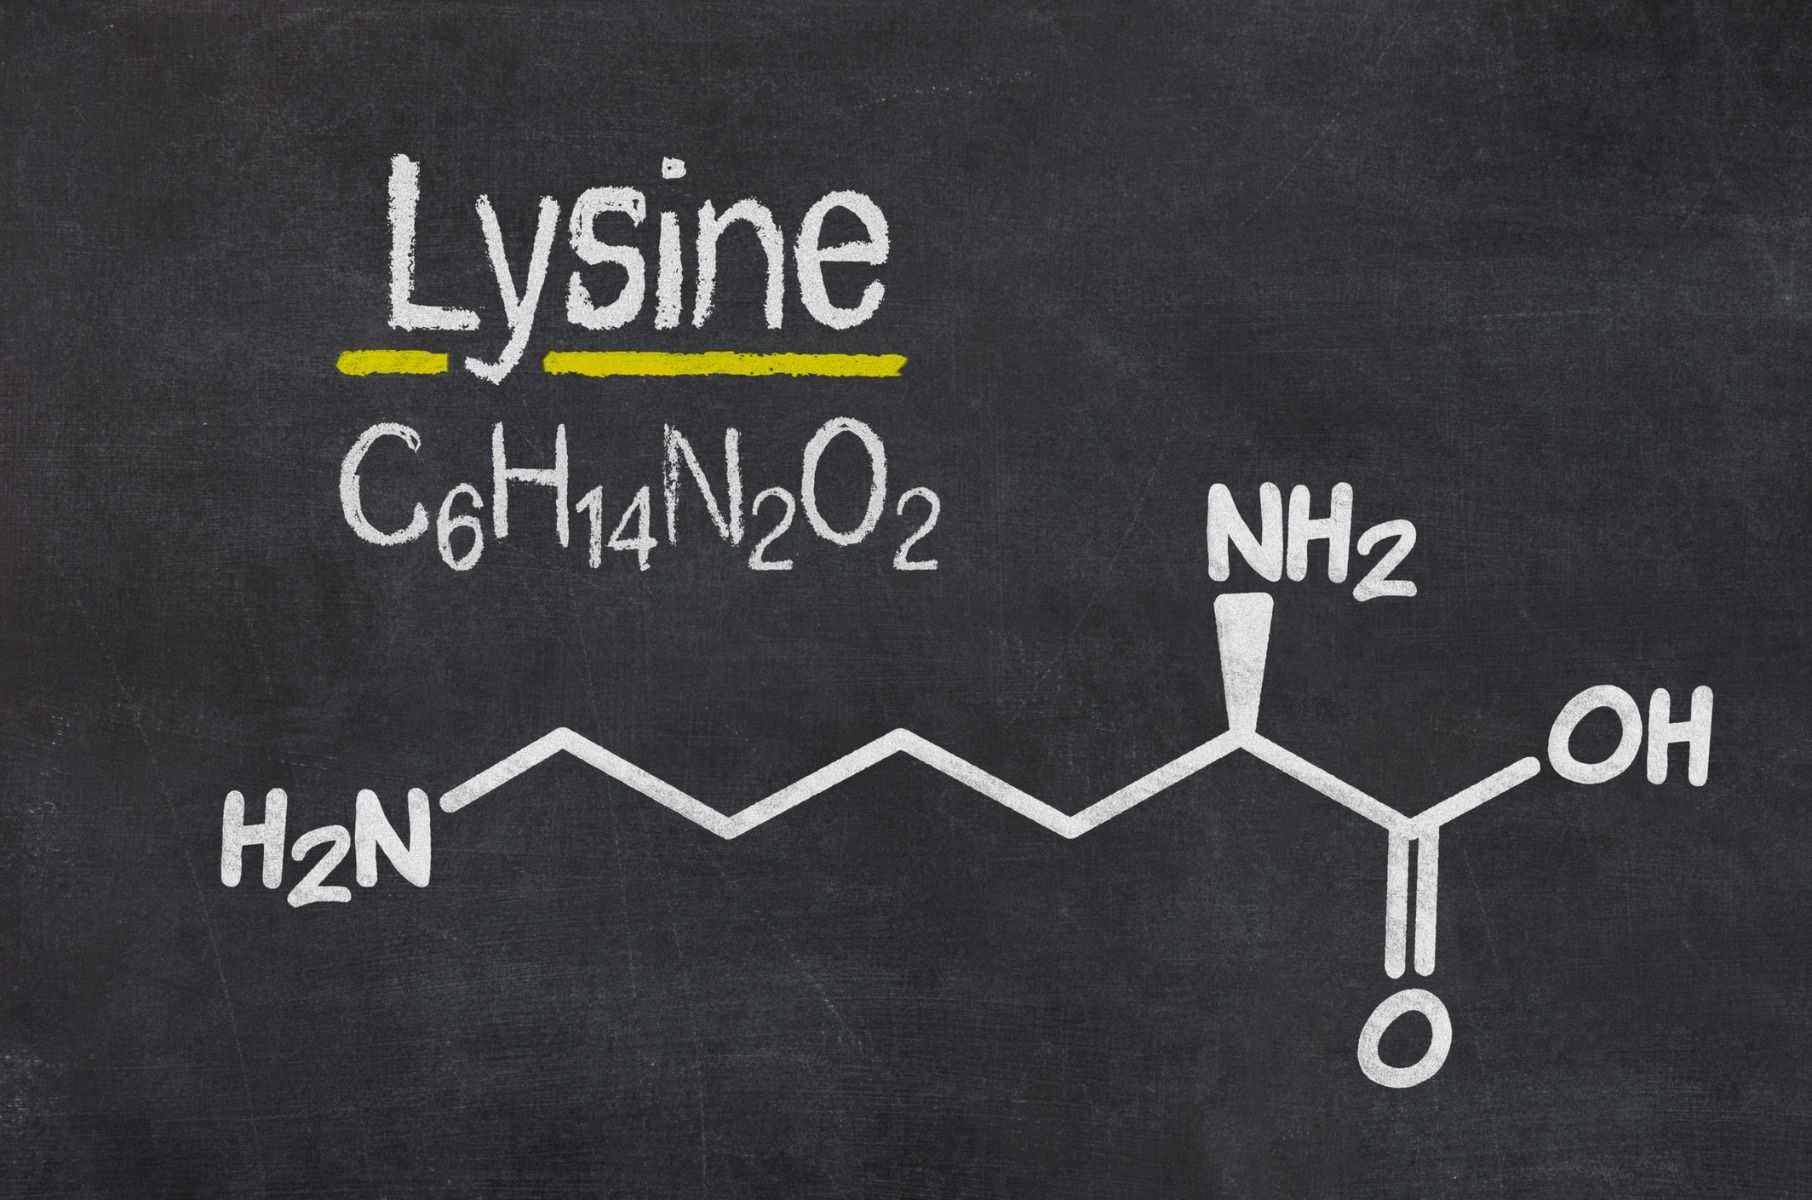 Lysine: healing wonder which can cure